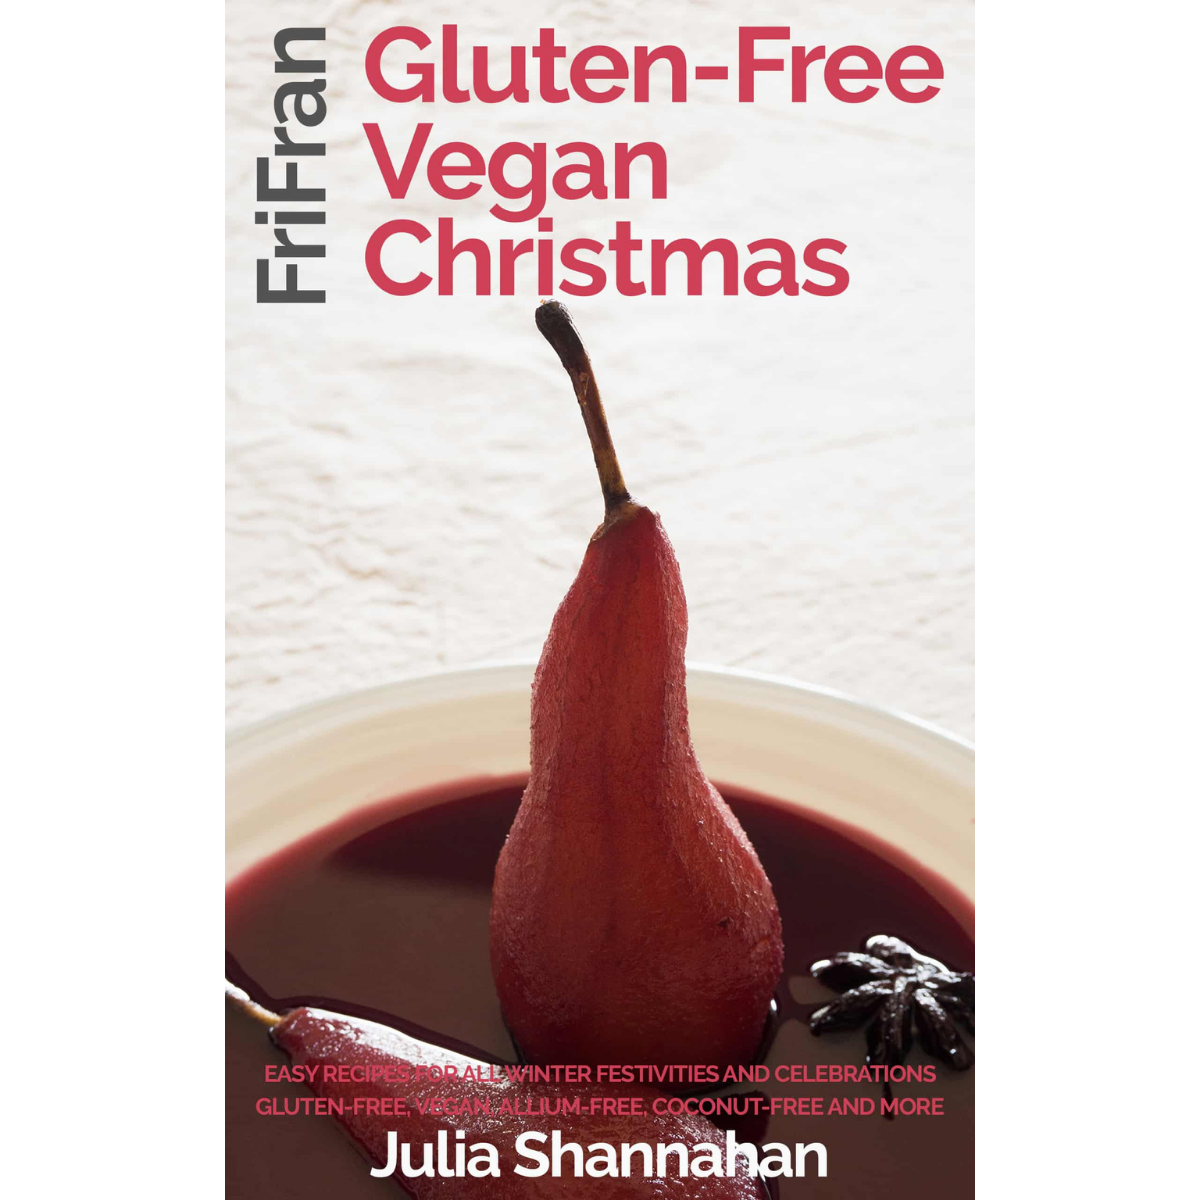 FriFran's Gluten-Free, Vegan Christmas. Cookbook. Easy recipes for all winter festivities and celebrations #frifran #glutenfree #vegan #glutenfreevegan